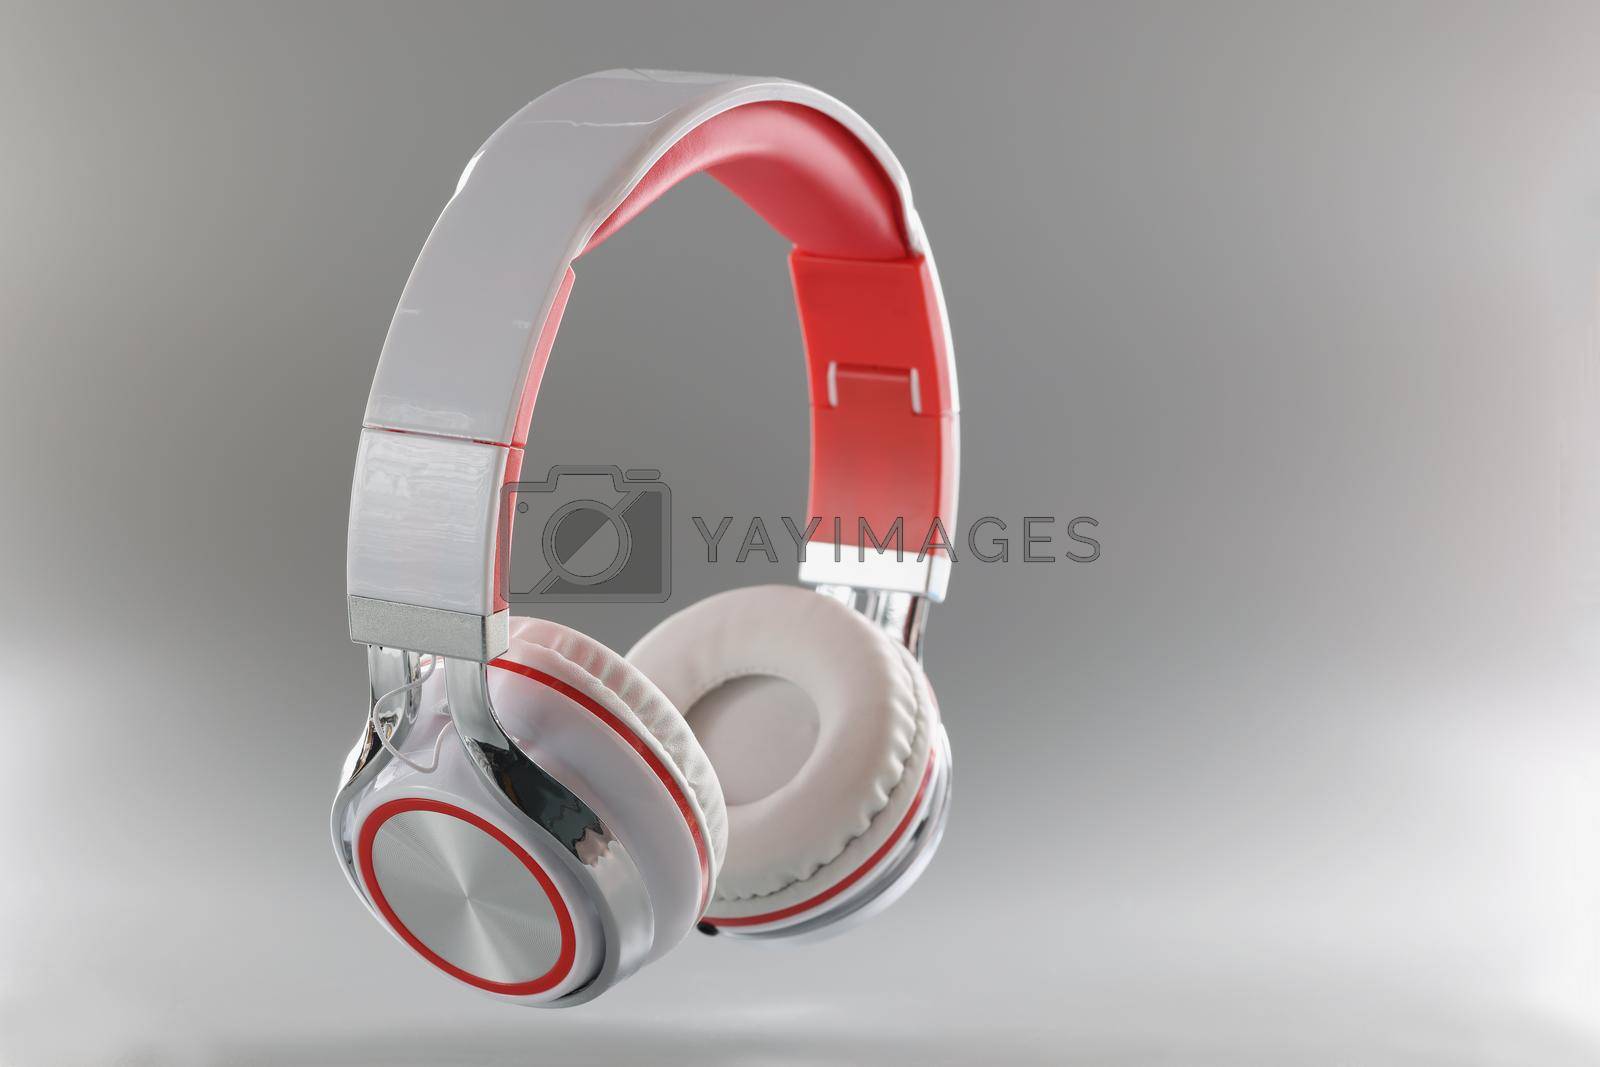 Royalty free image of Gray bluetooth wireless headphones, close-up by kuprevich